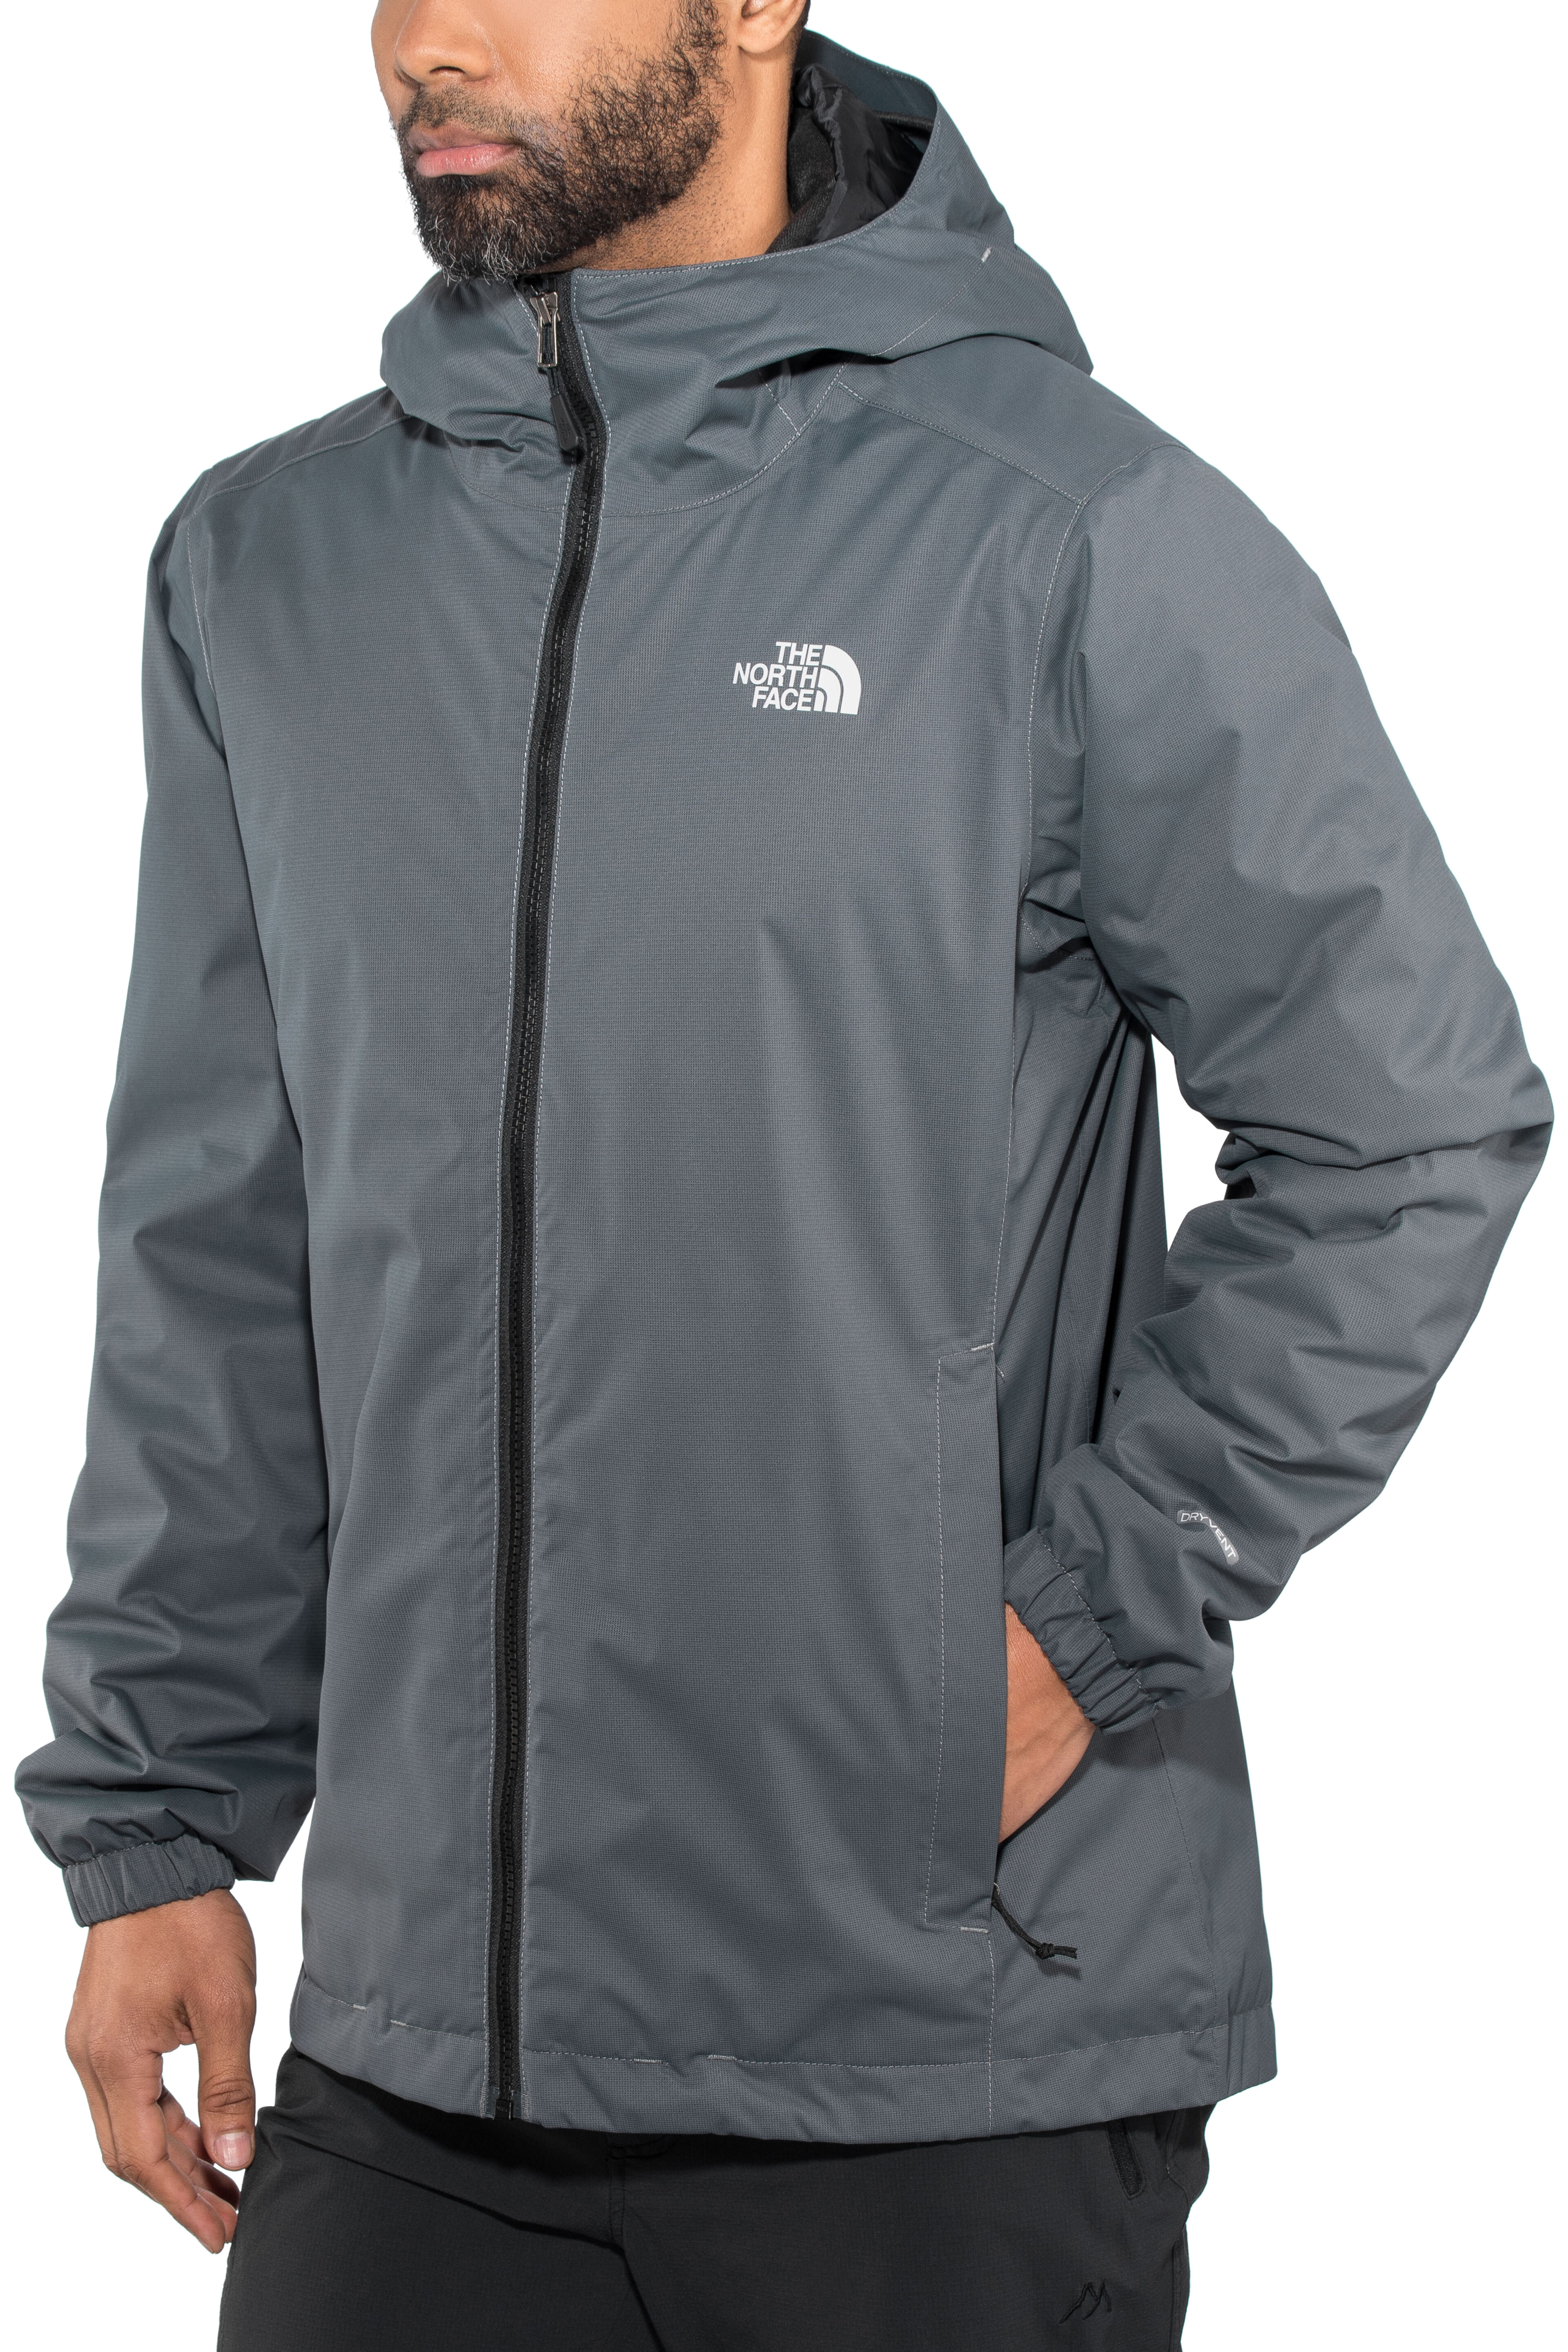 The North Face Quest Insulated Jacket Men vanadis grey black heather ...